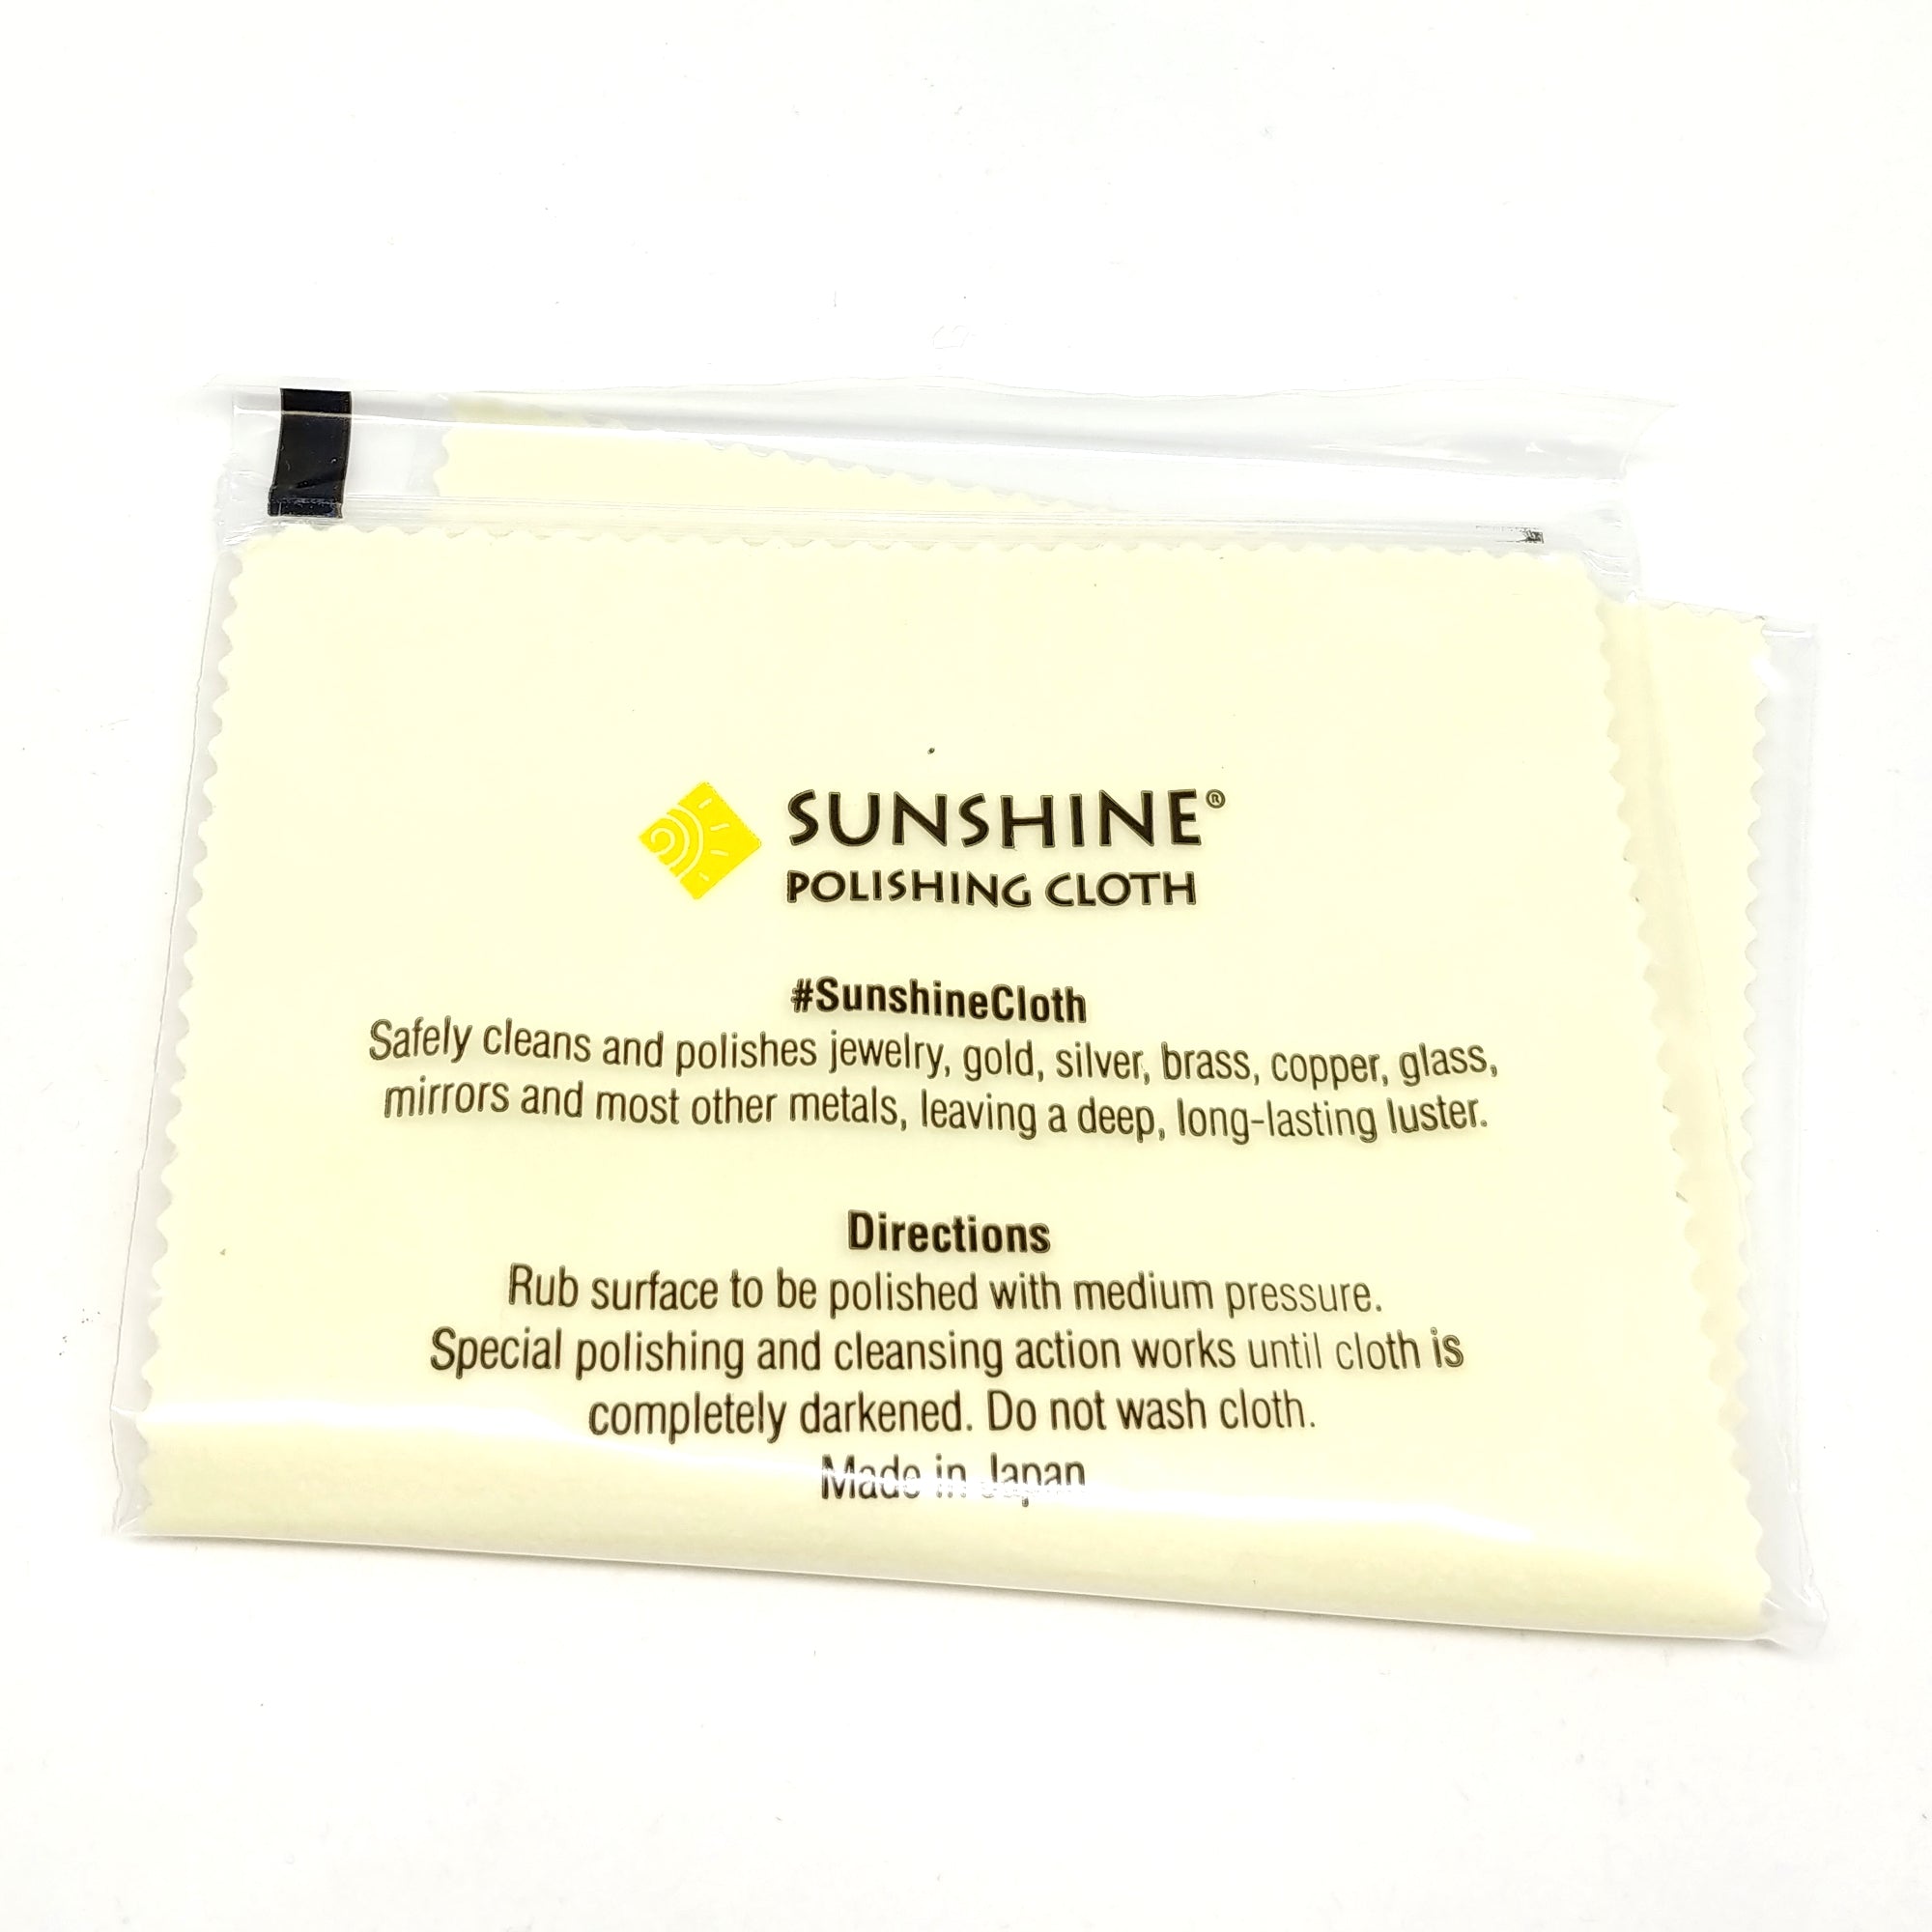 Sunshine Polishing Cloth for Jewelry and Other Items 